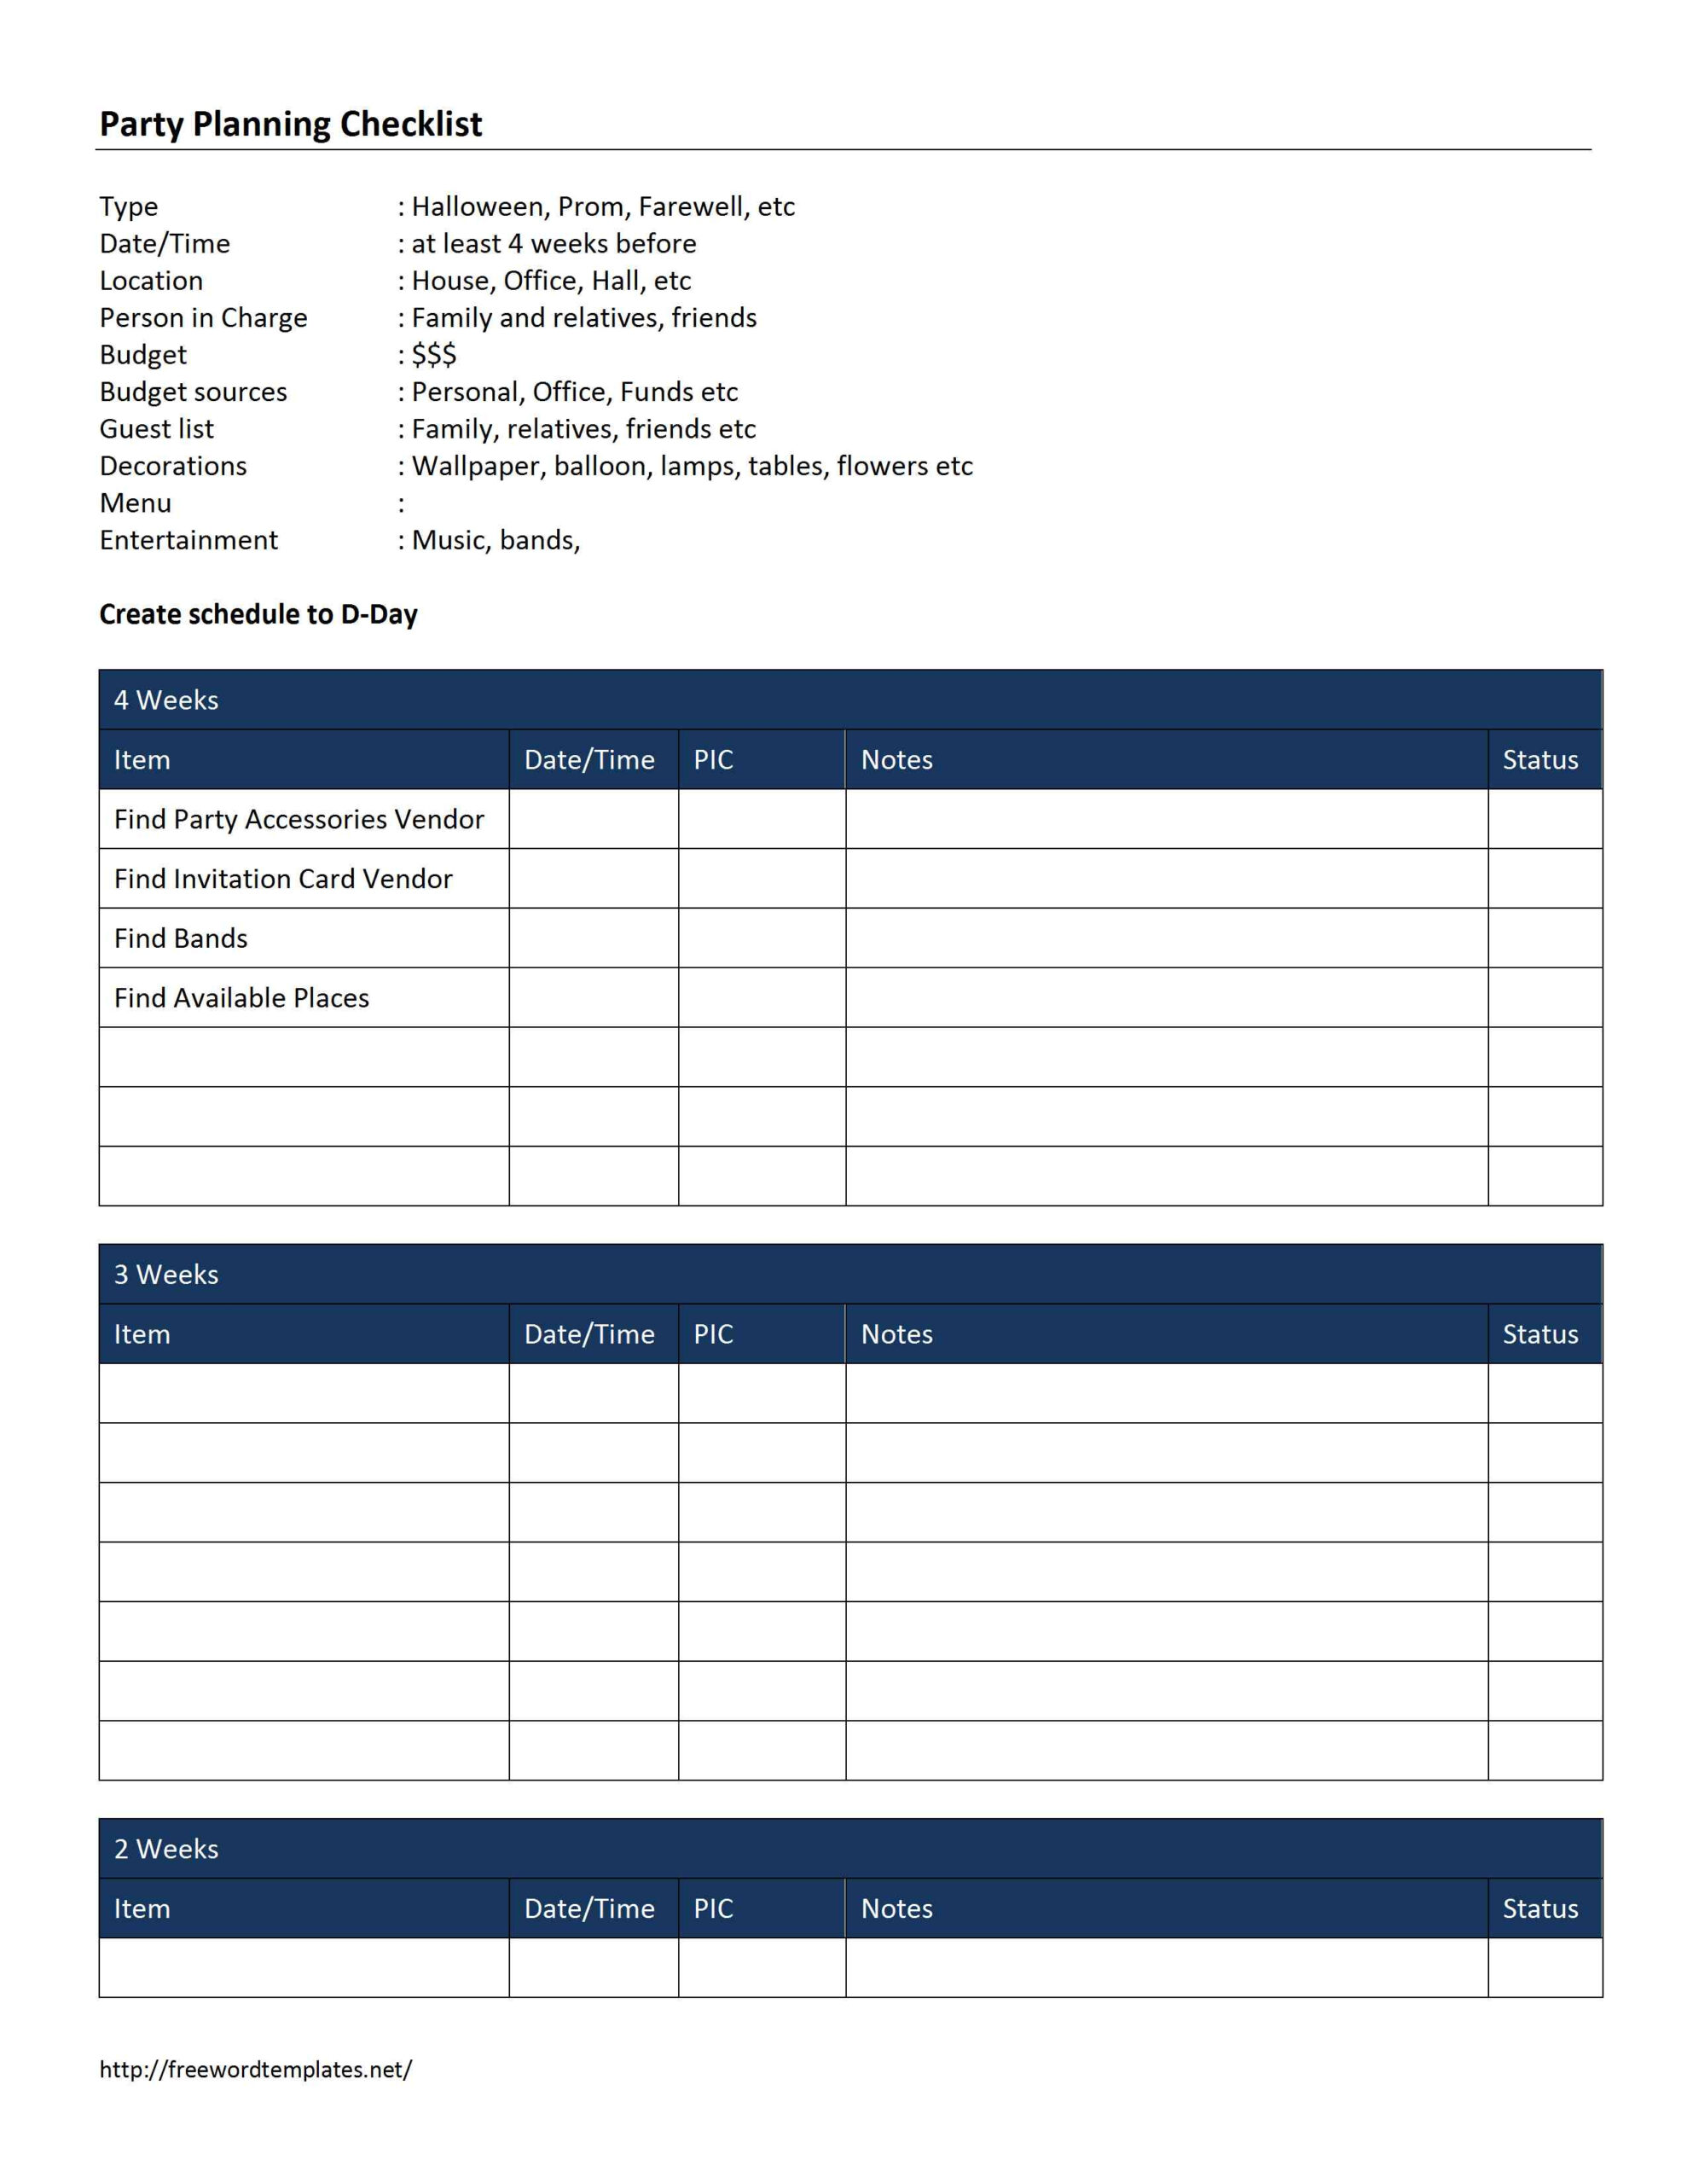 Party Planning Checklist Template Within Party Planning Checklist Template Intended For Party Planning Checklist Template